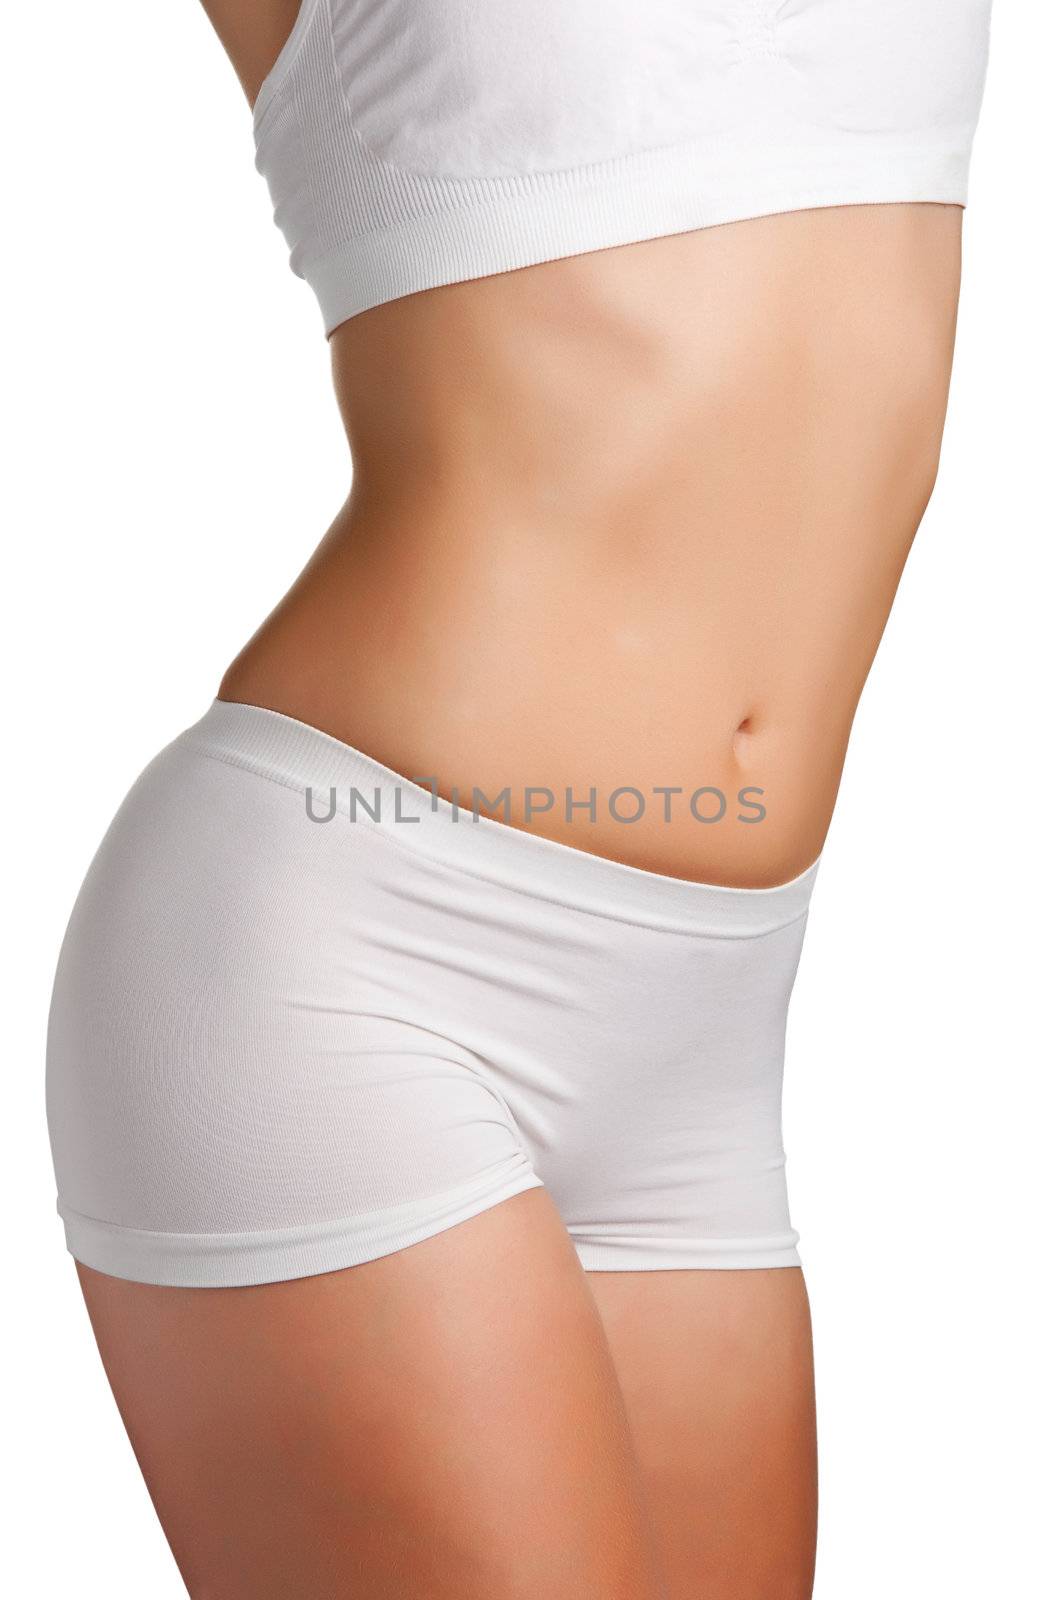 Closeup of a slim female body on a white background
